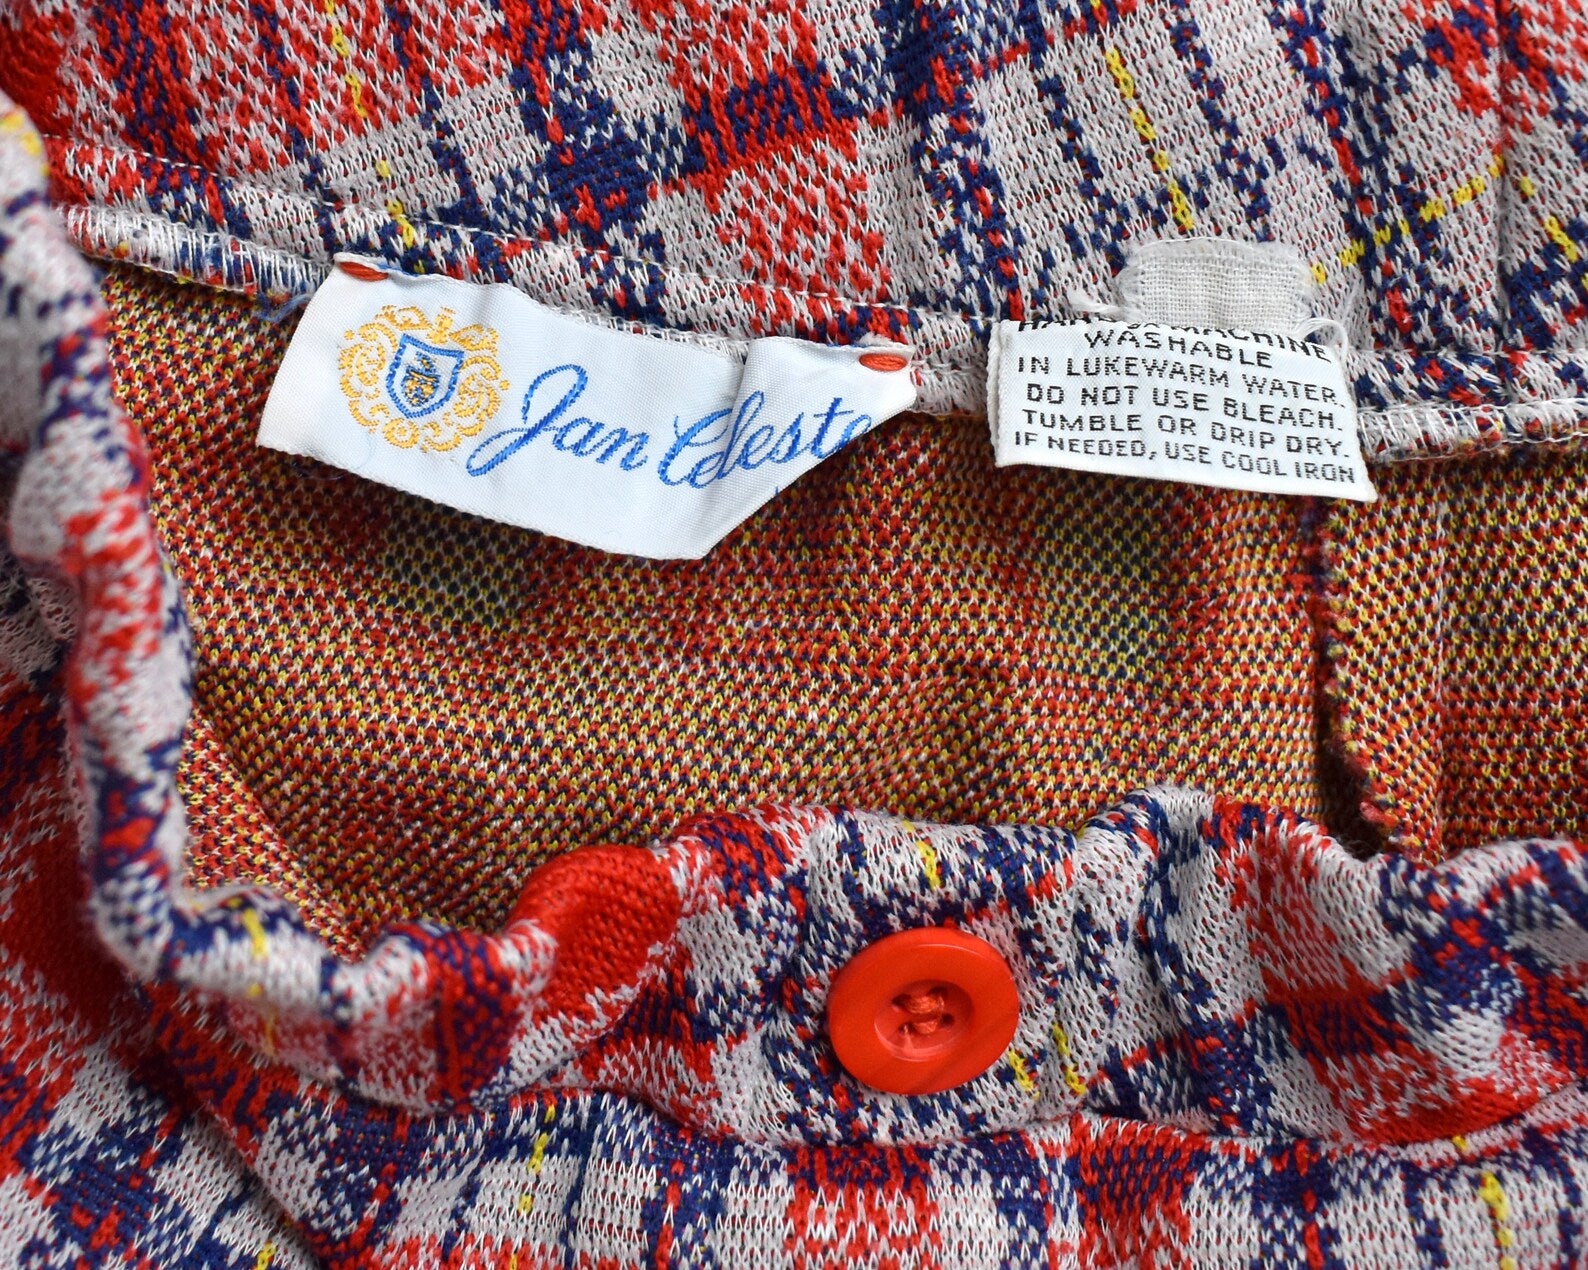 Close up of the tag that says Jan Celeste